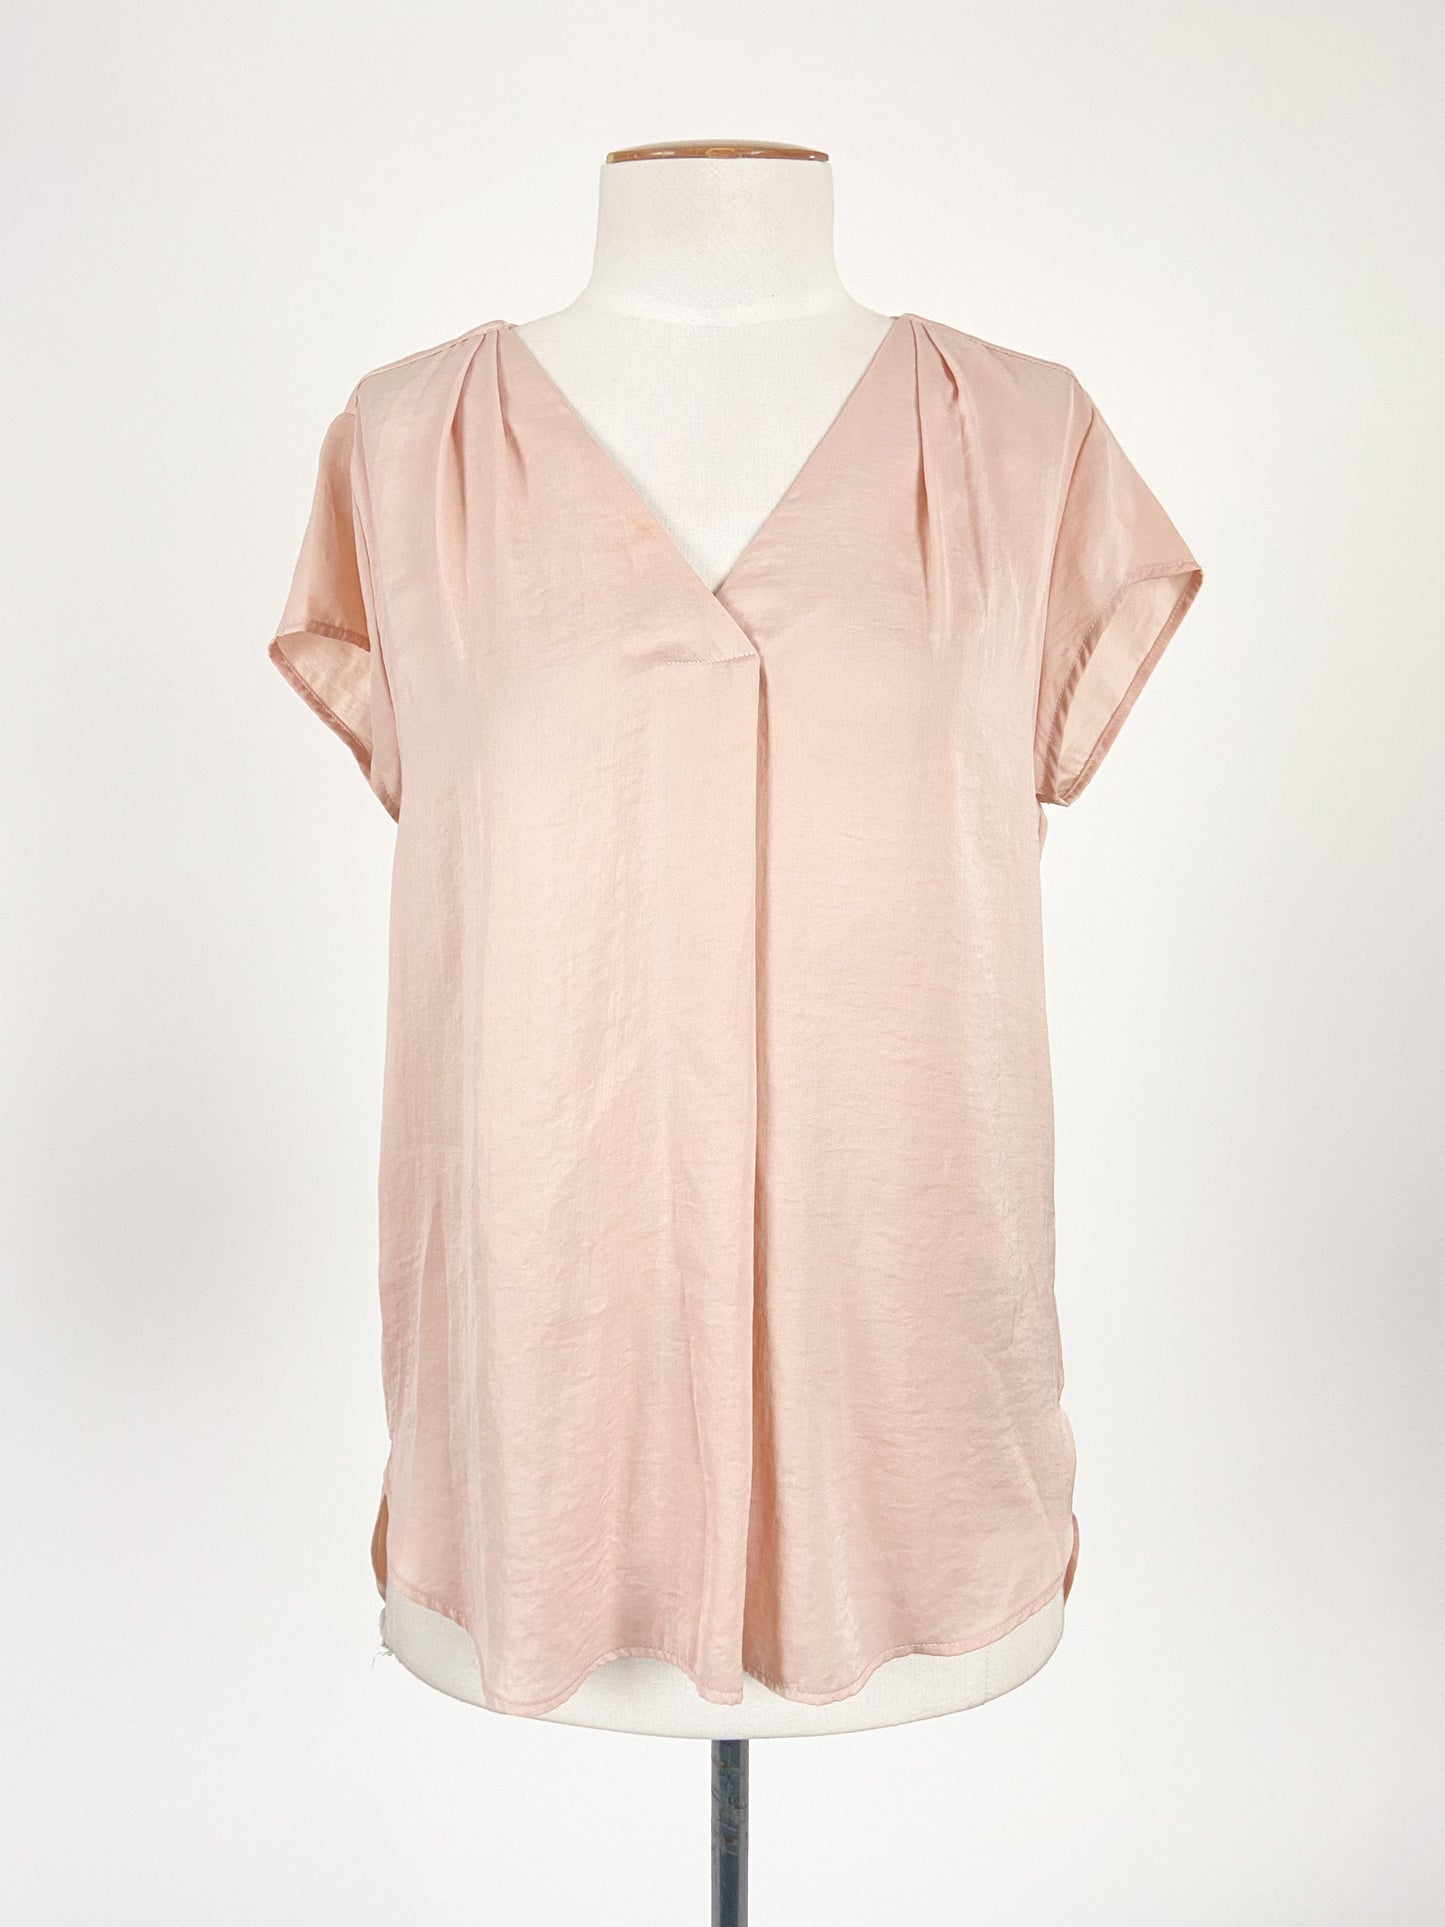 H&M | Pink Casual/Workwear Top | Size XS